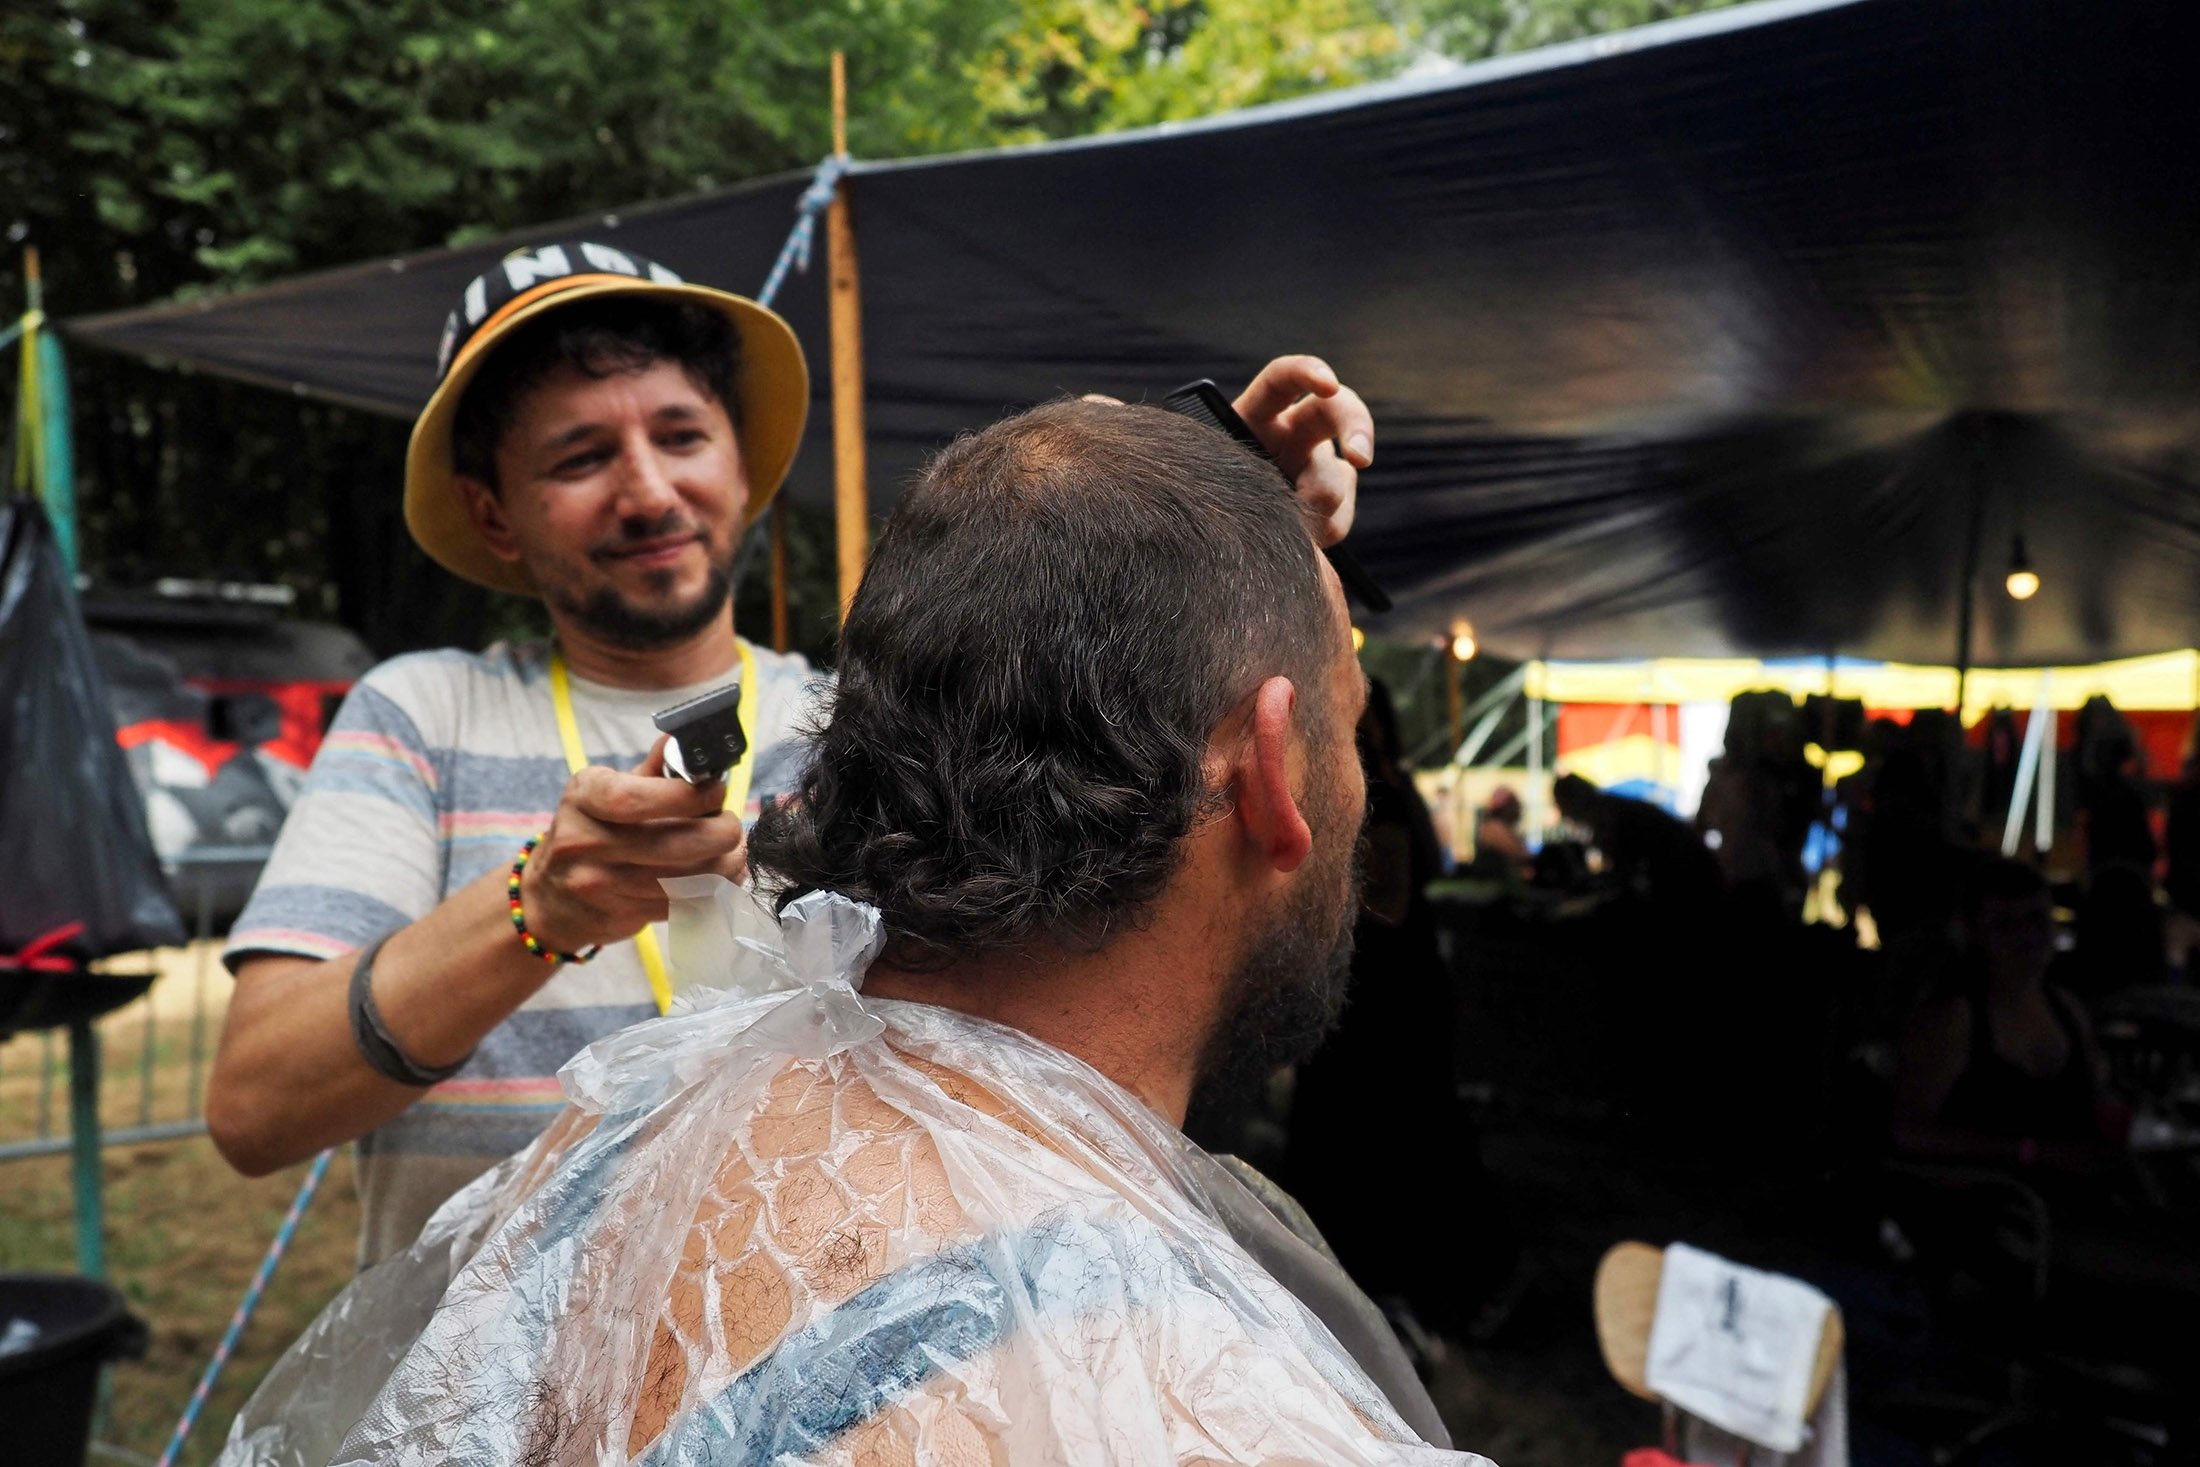 A competitor in the 2021 Mullet Cup gets a haircut during the European mullet haircut festival in Cheniers, central France, Sept. 4, 2021. (AFP Photo)